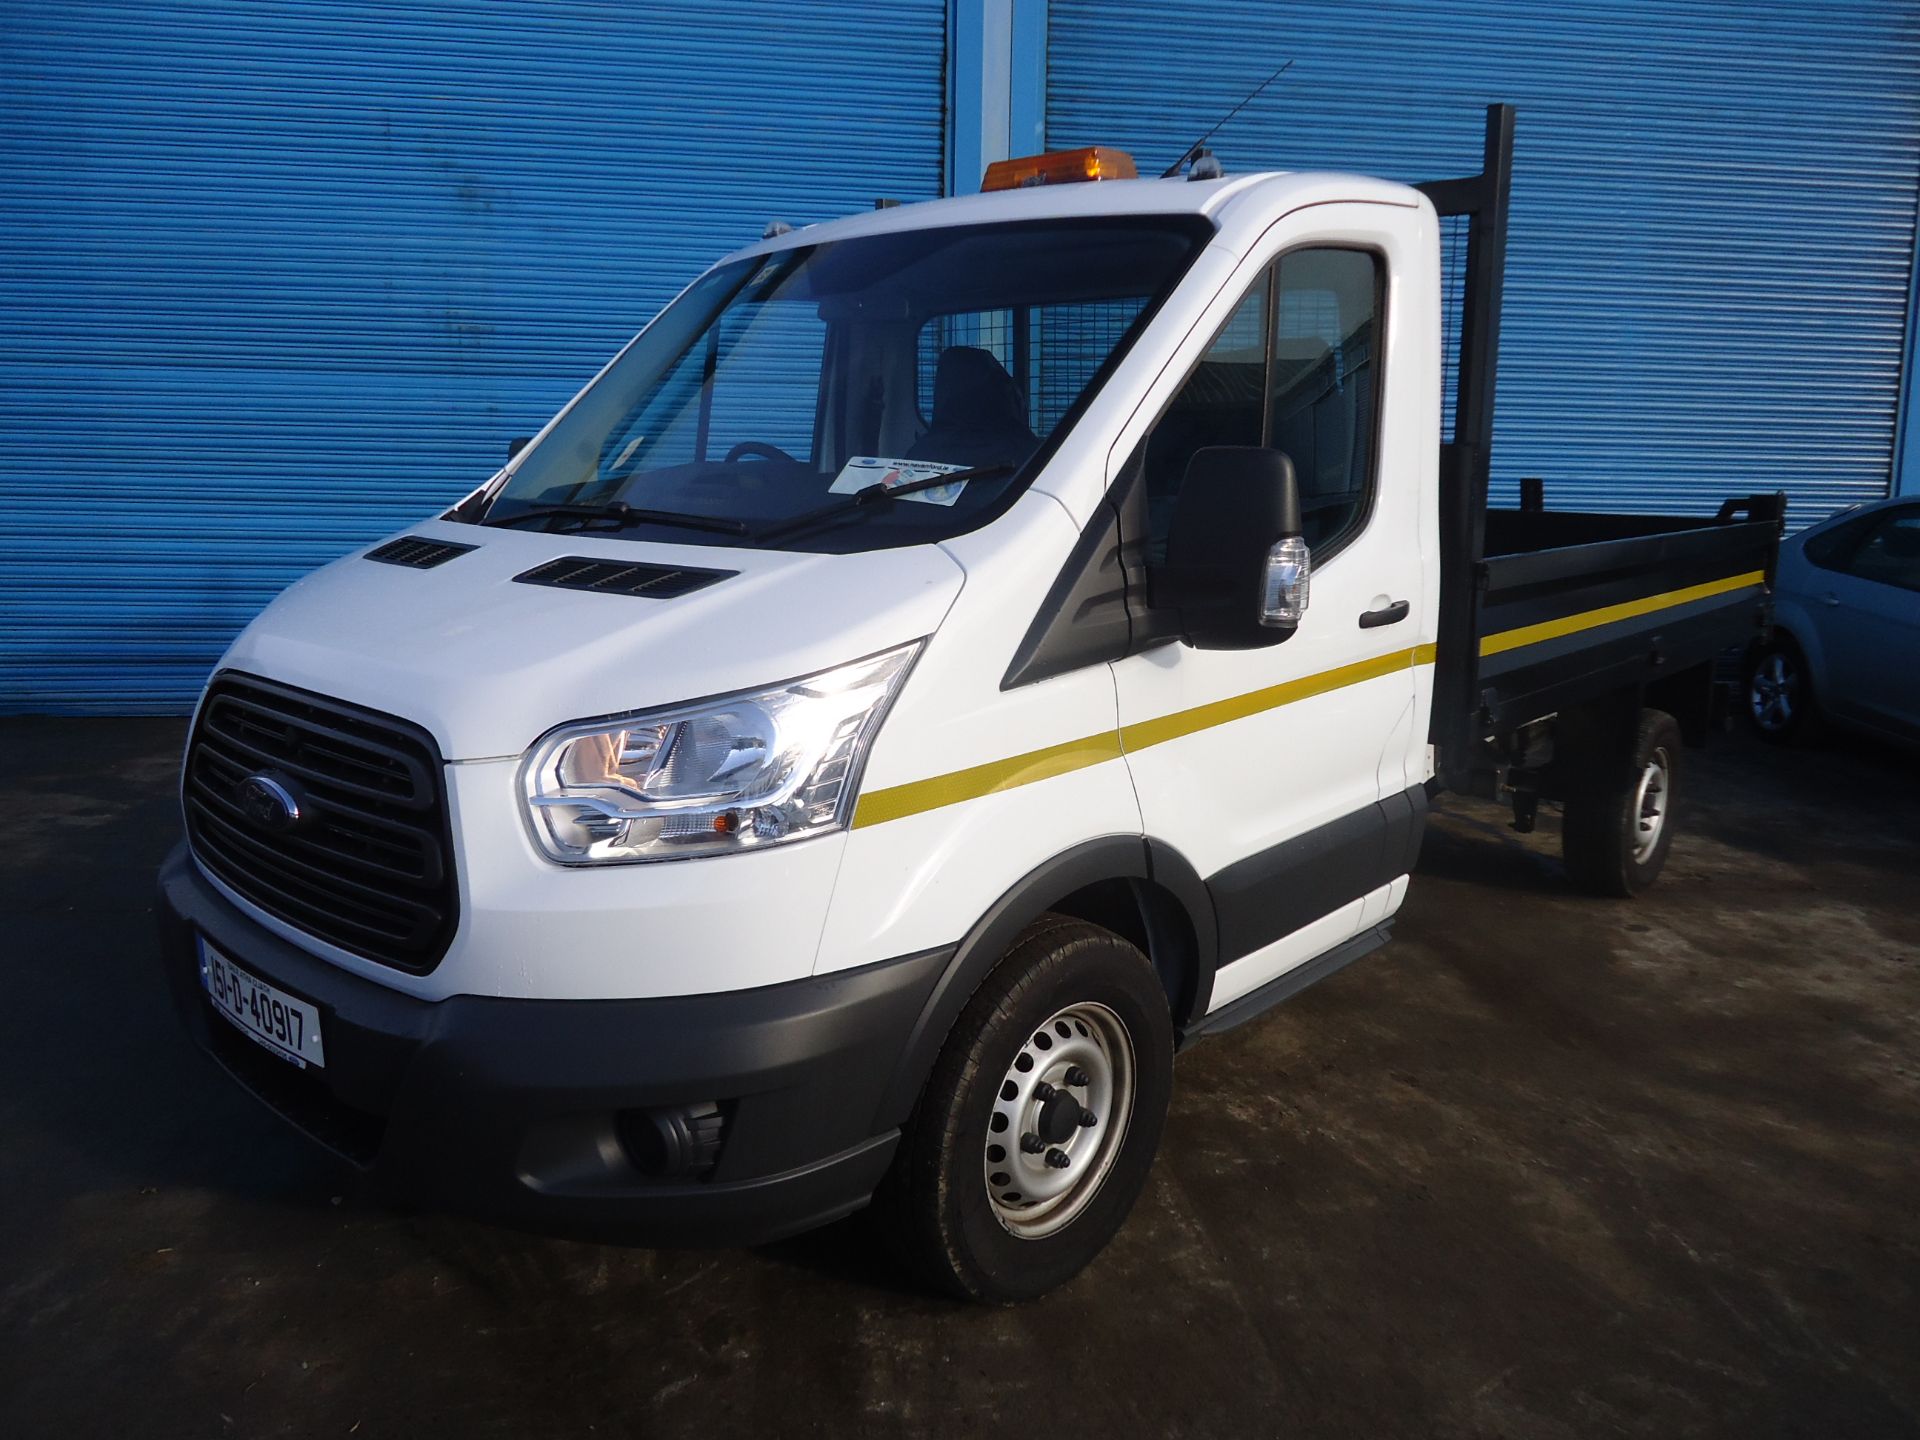 151D40917 Ford Transit Tipper - Image 7 of 19